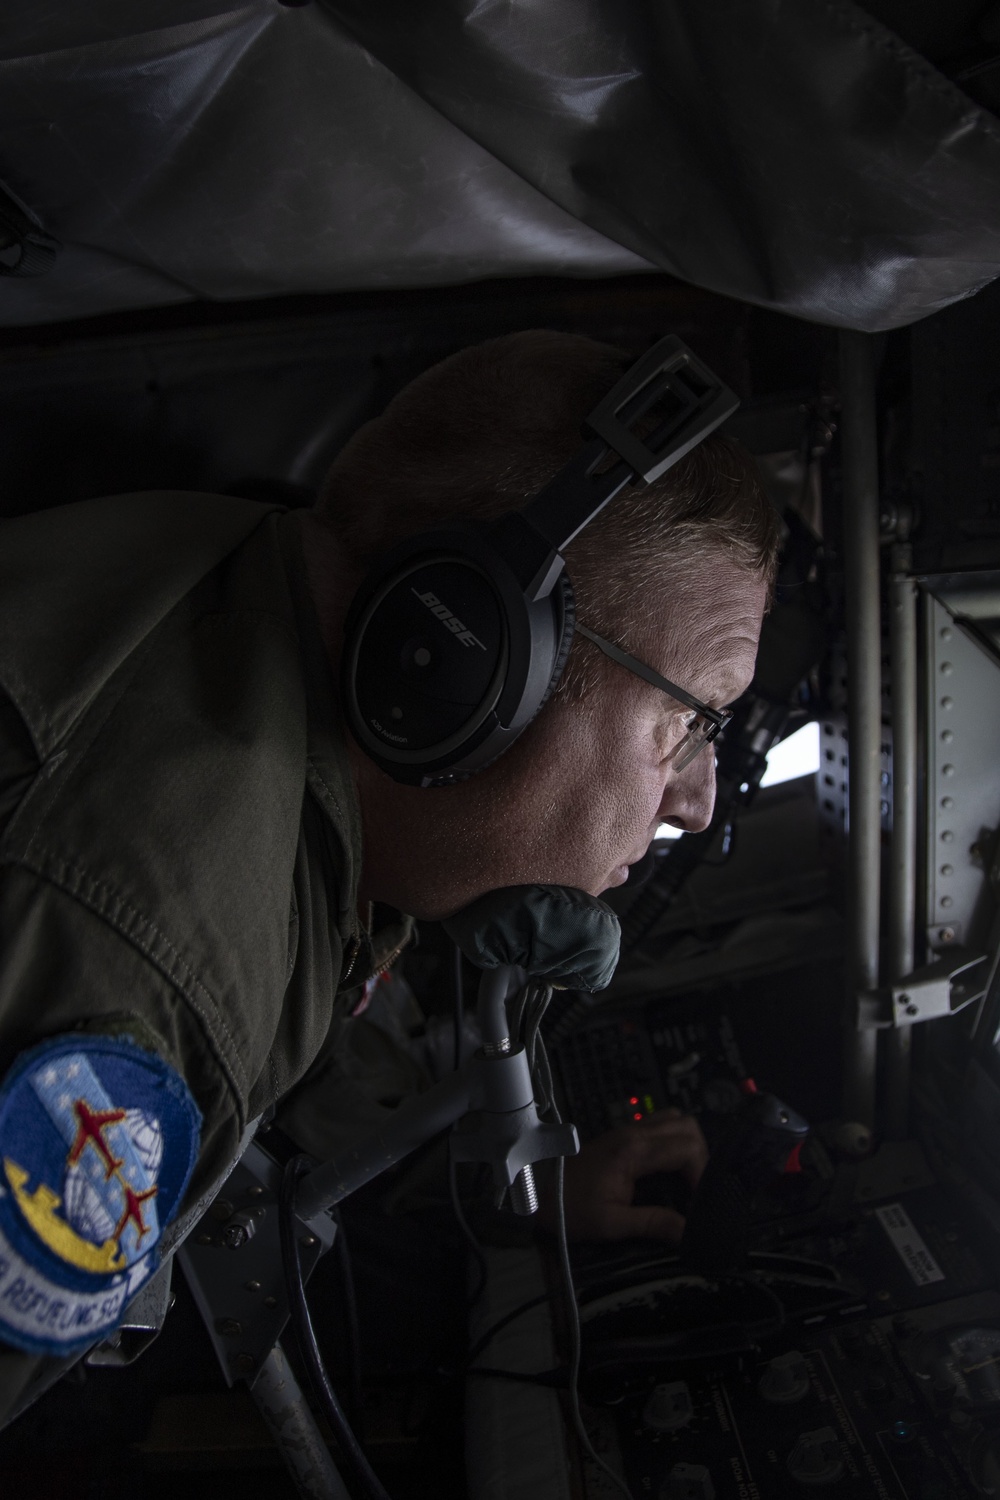 121 ARW Boom operator retires after 34 years of service